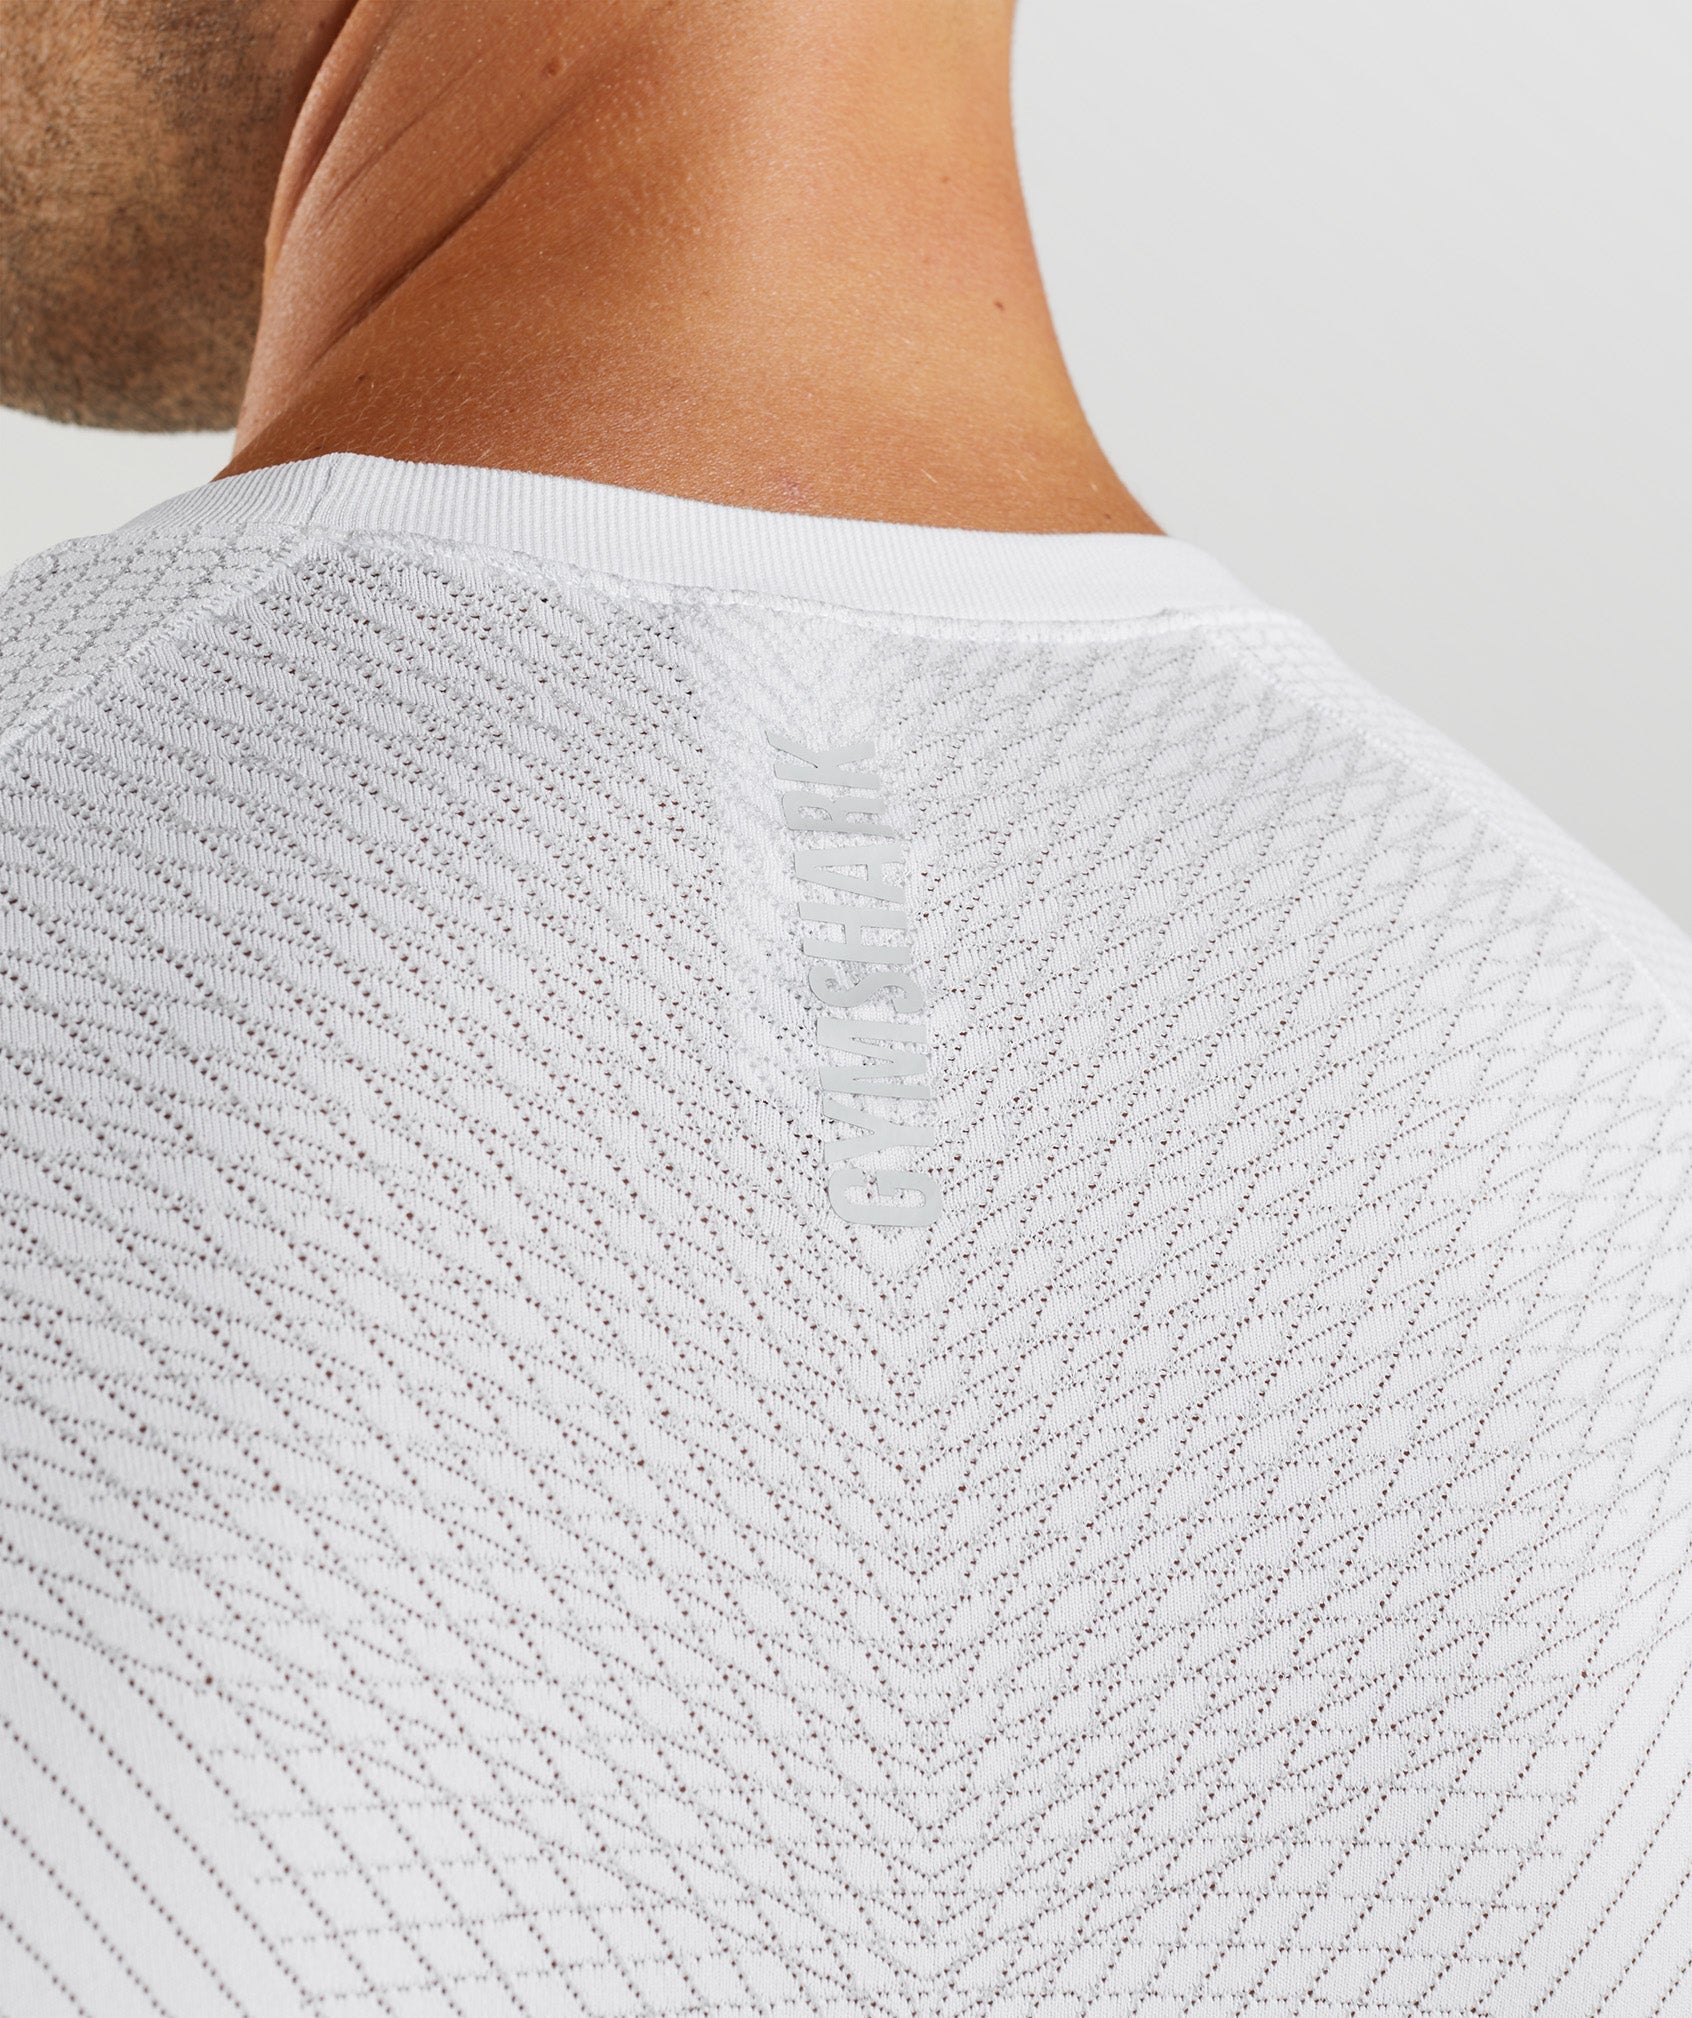 Apex Seamless T-Shirt in White/Light Grey - view 5